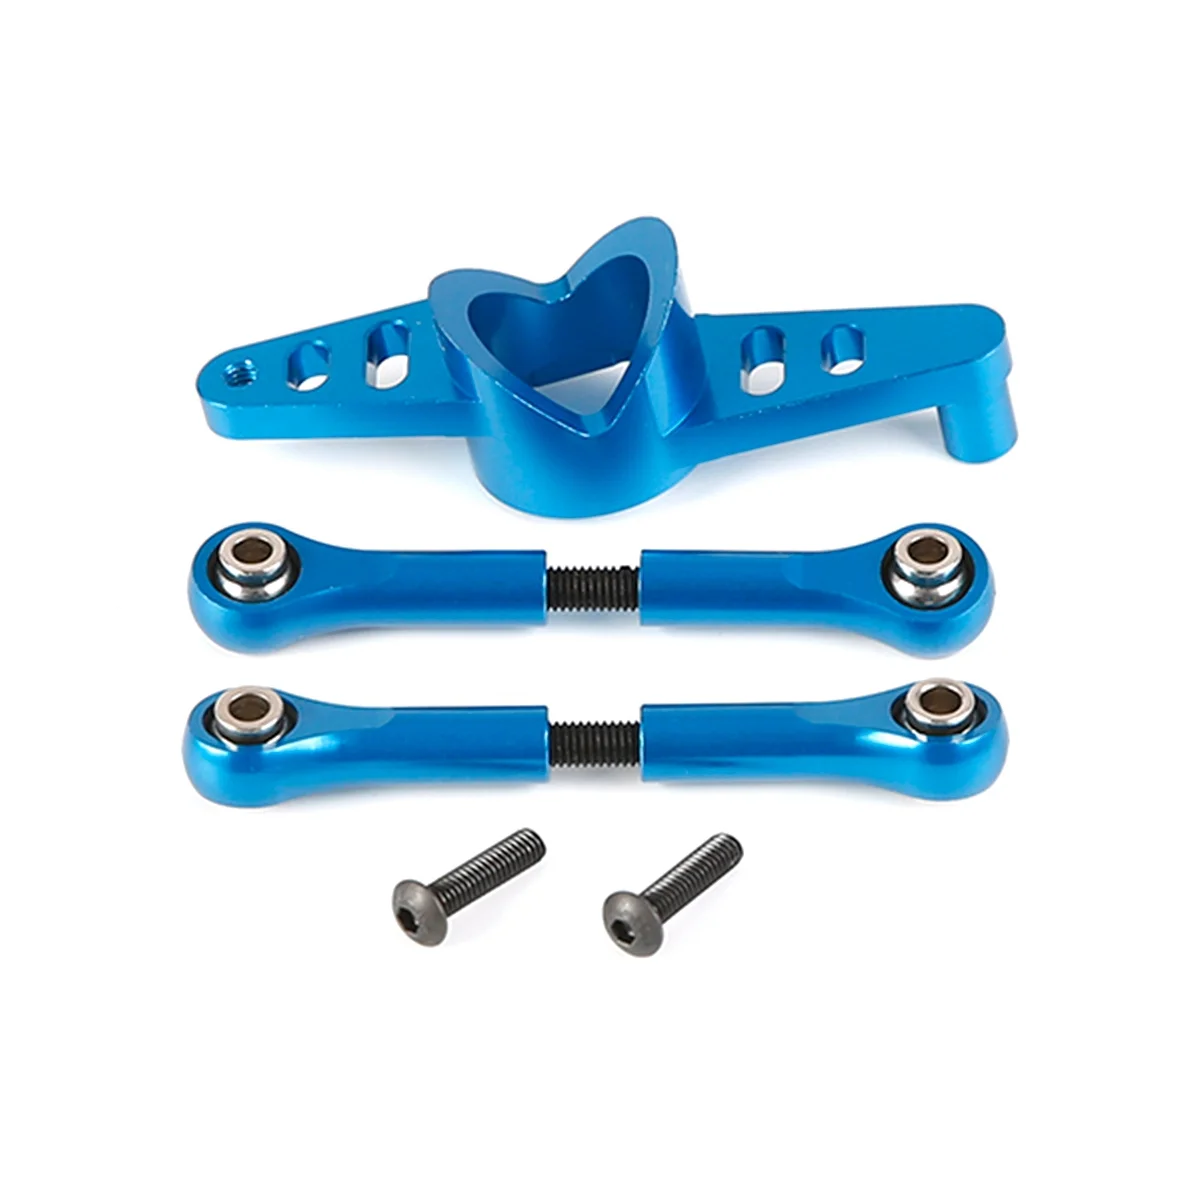 

LT CNC Metal Double Steering Gear Seat Kit for Losi 5T Rovan LT King Motot,Modified and Upgraded Accessories,Blue